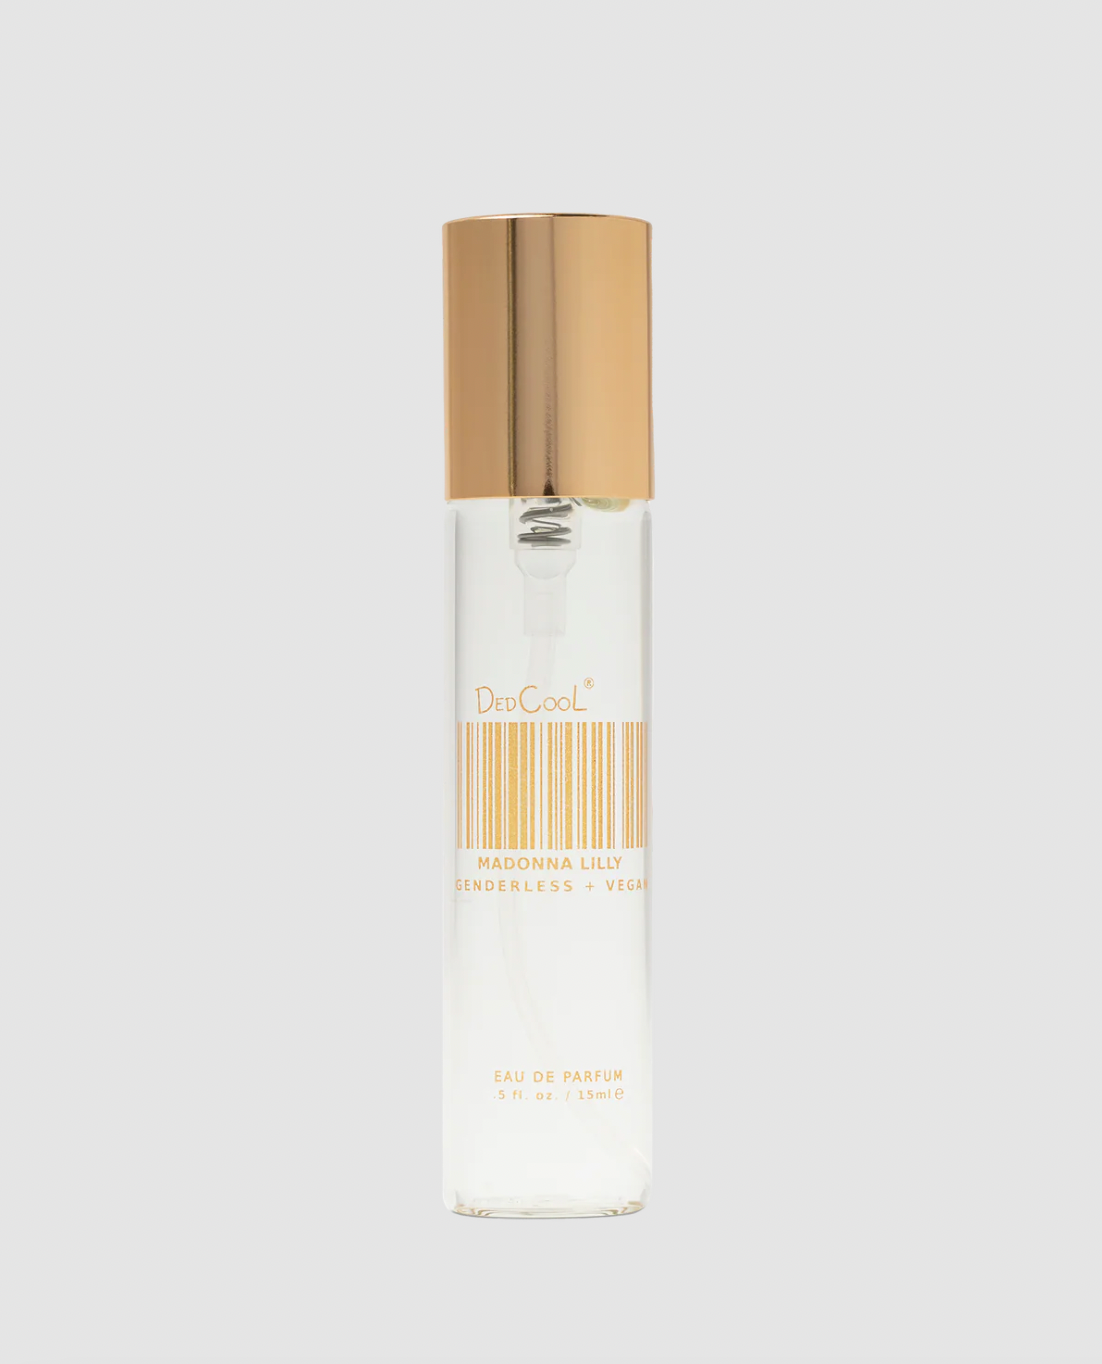 Product Image for Travel Fragrance, Madonna Lilly